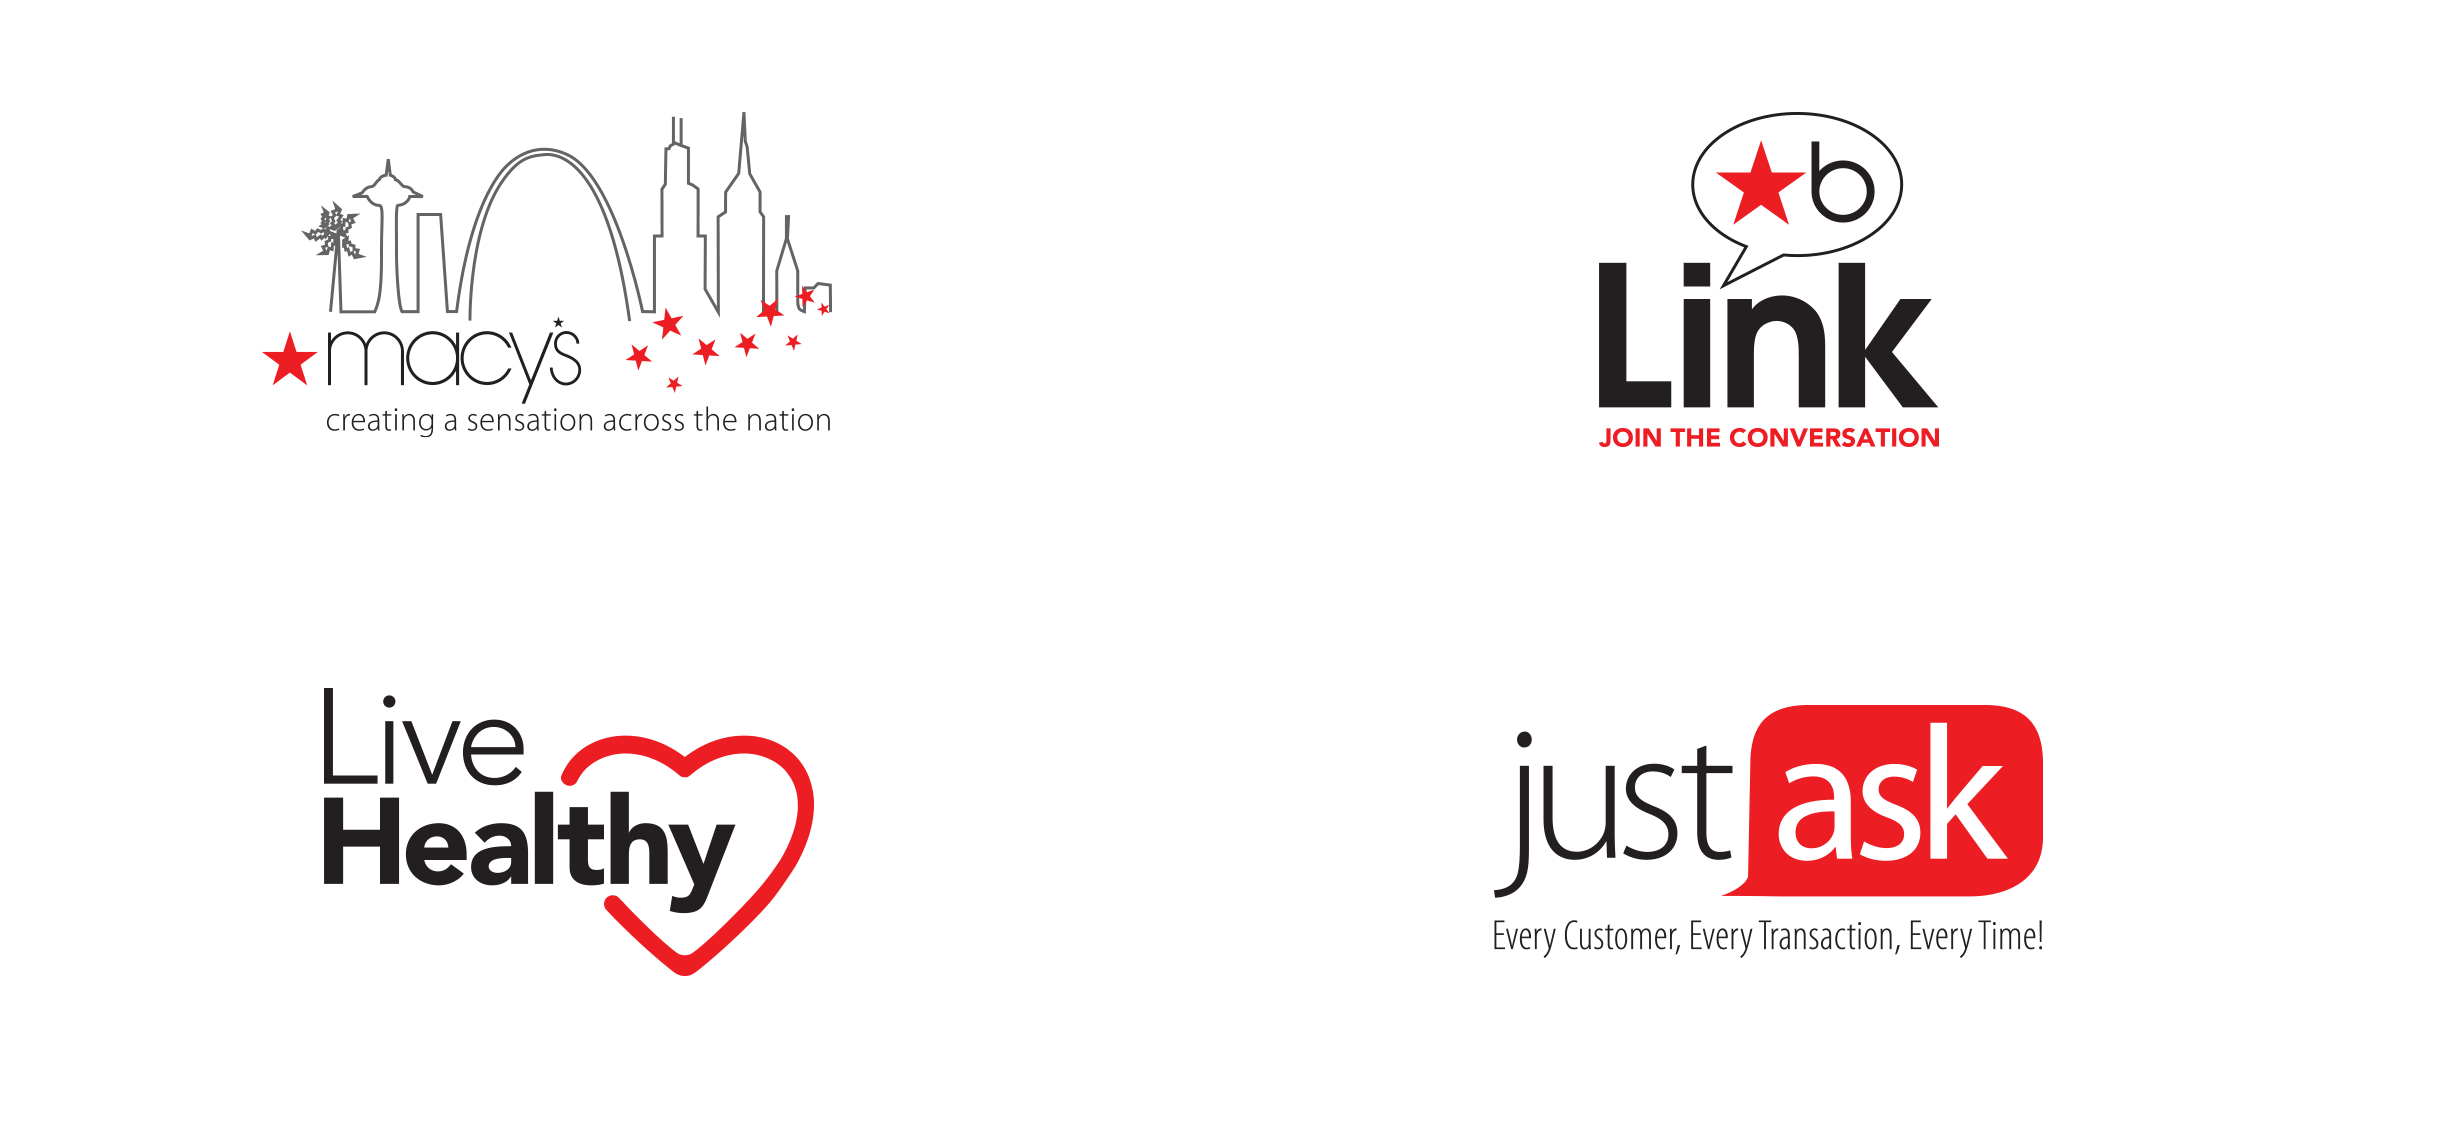 Final logo designs for various Macy's programs, events and marketing campaigns